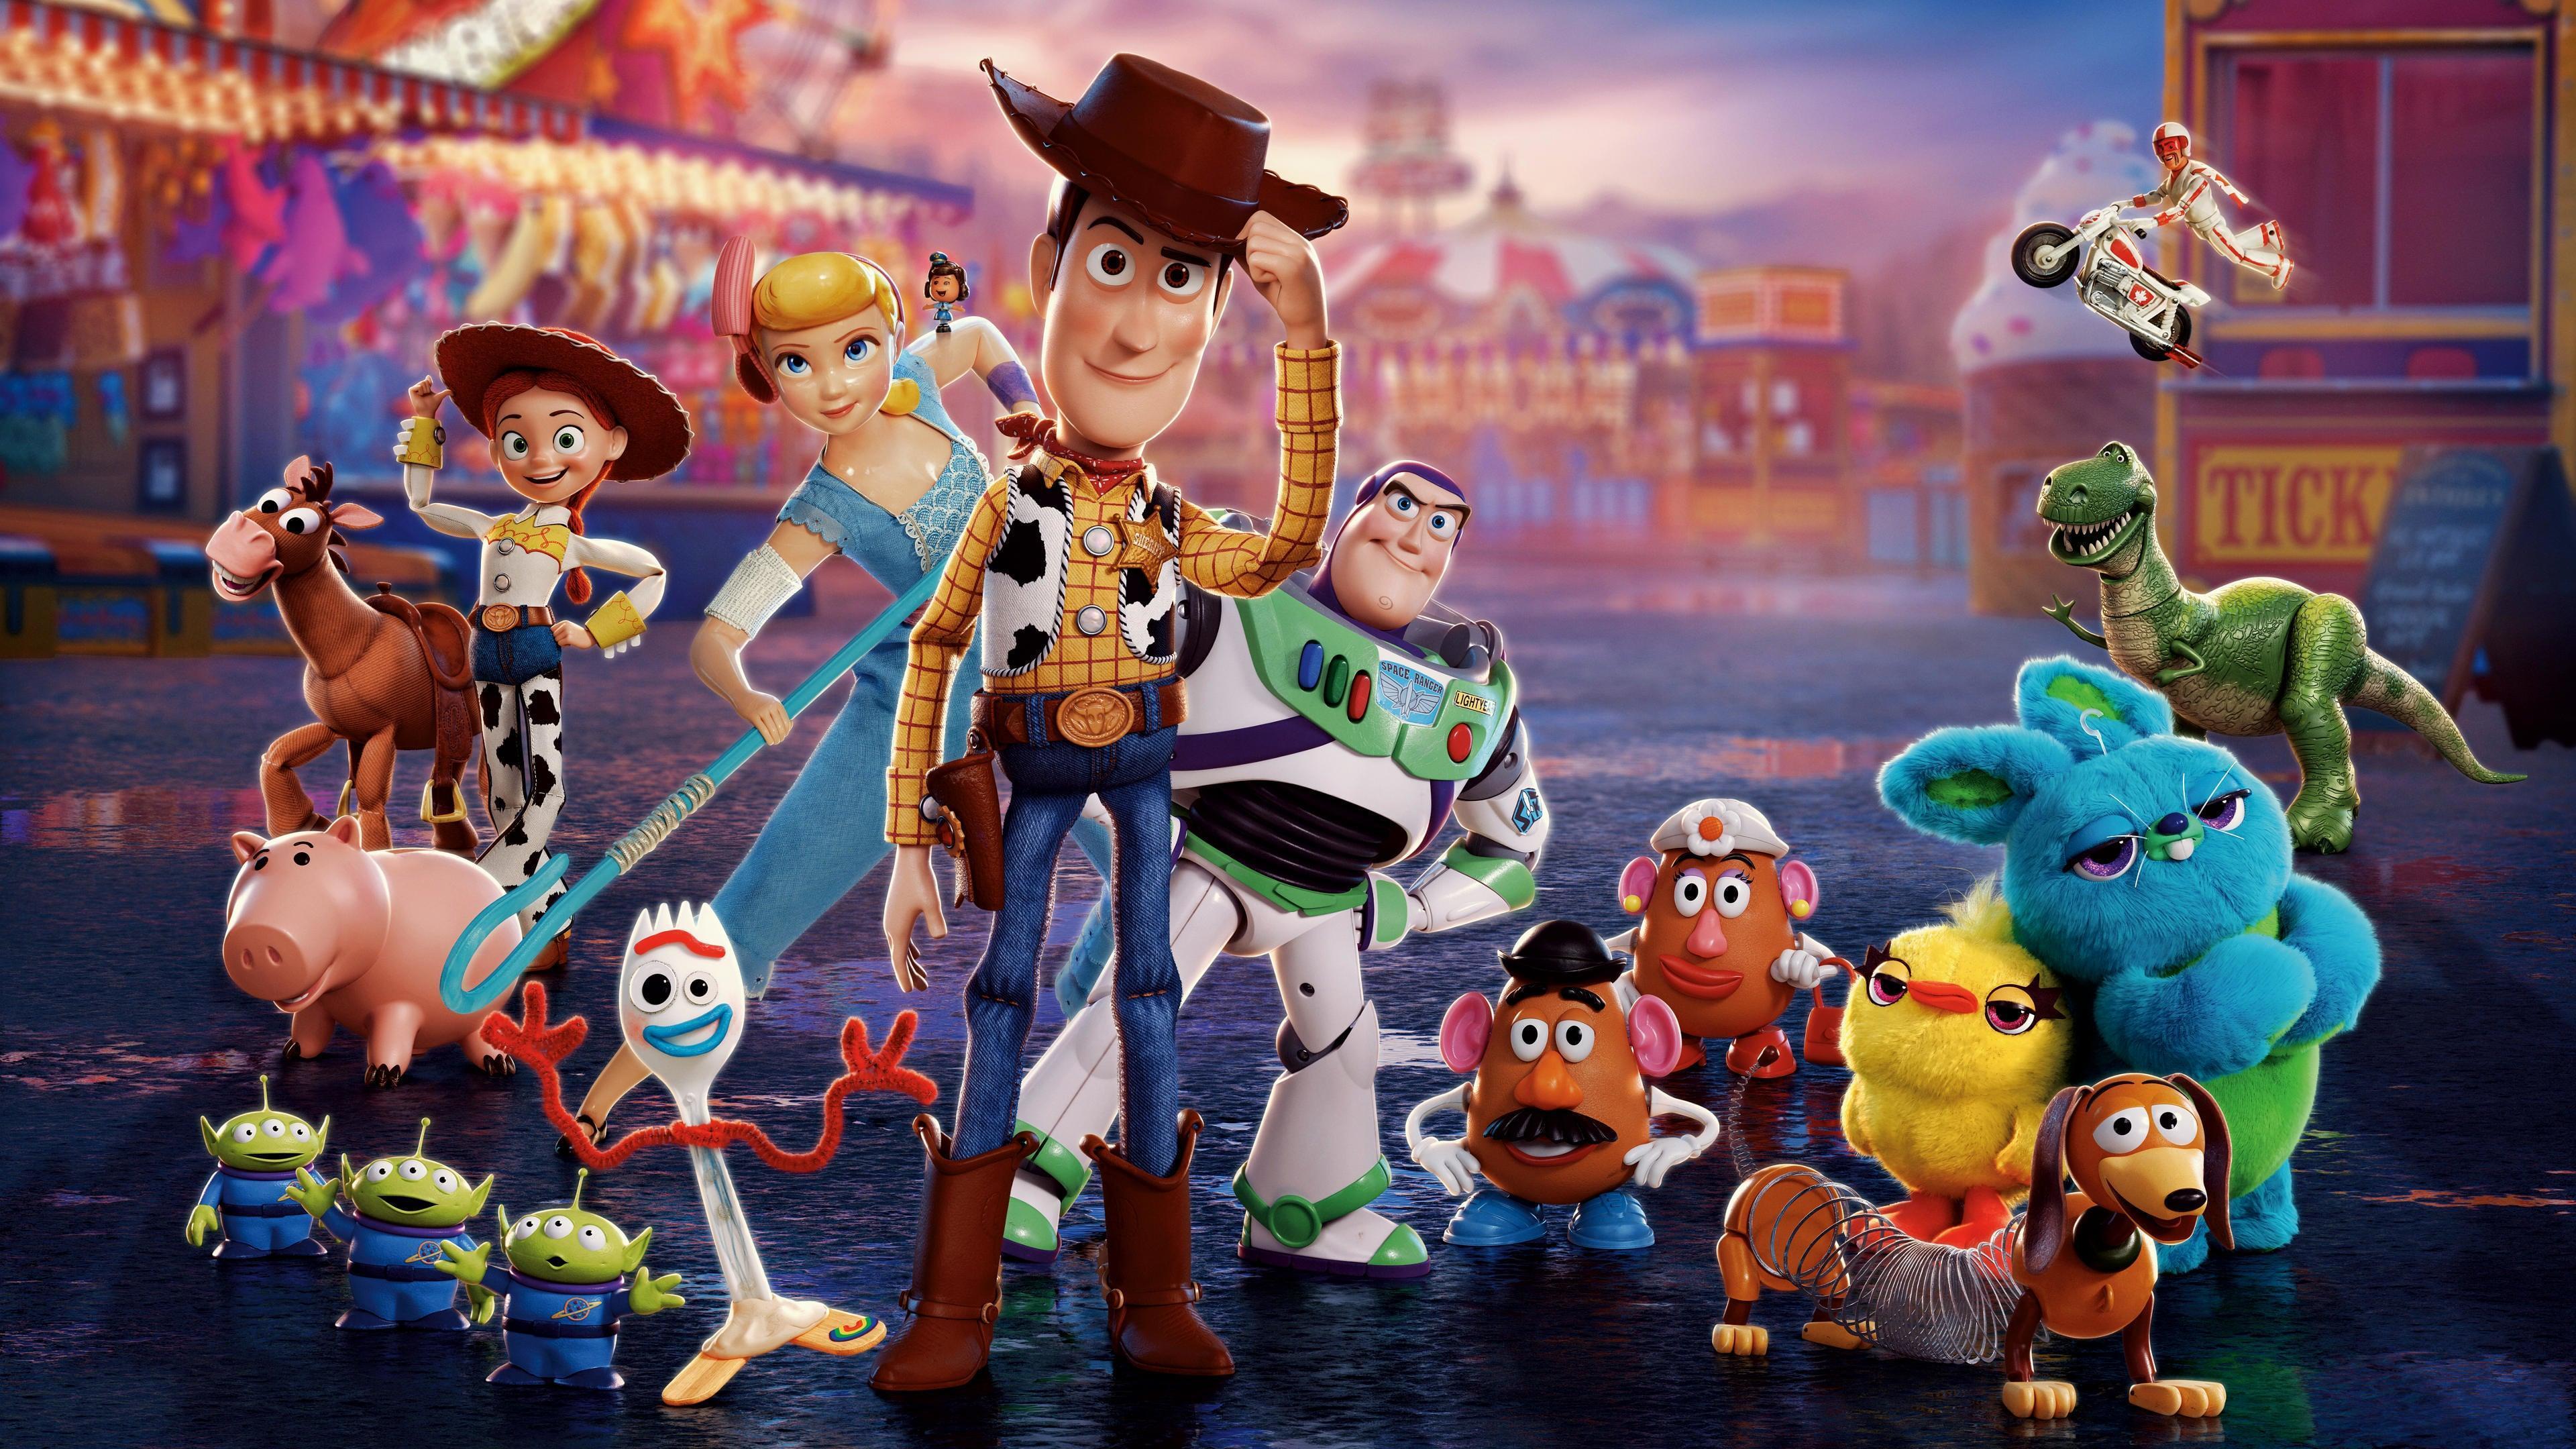 HD wallpaper, 4K, Characters, Toy Story 4